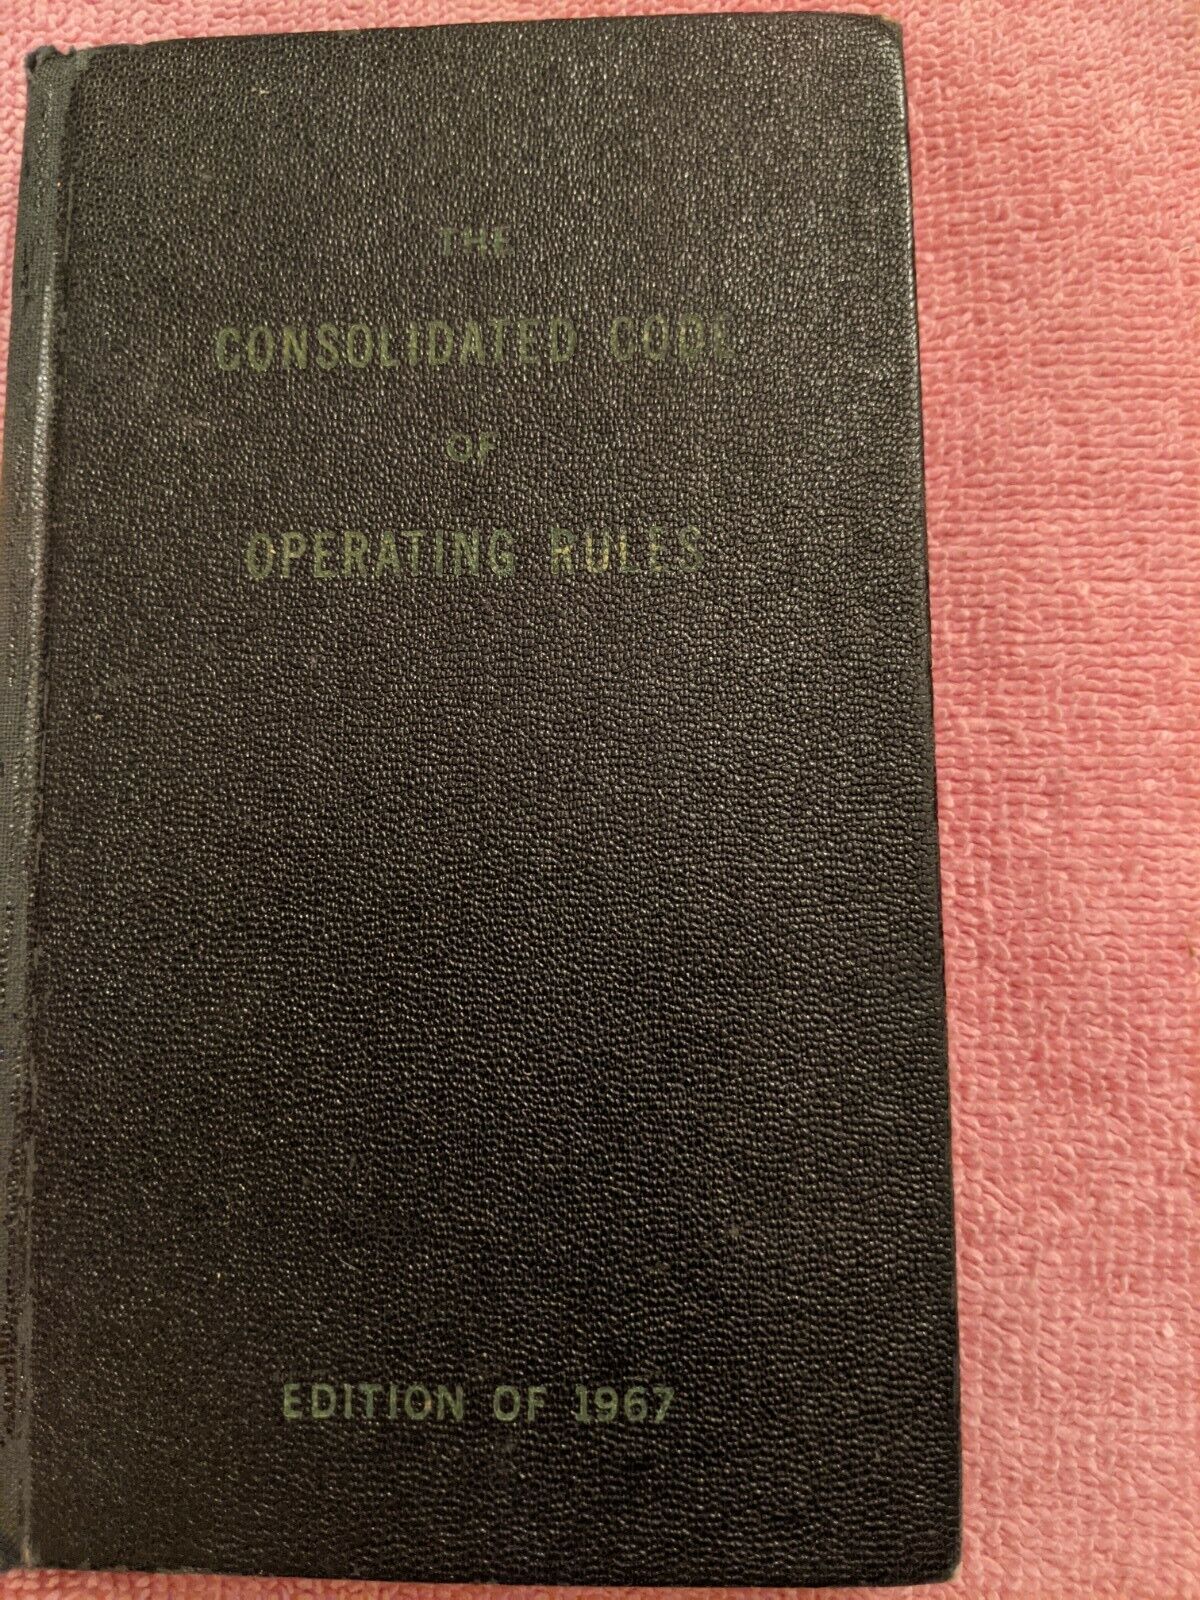 CONSOLIDATED CODE OF OPERATING RULES-Edition of 1967, 186 Pages, Color Diagrams